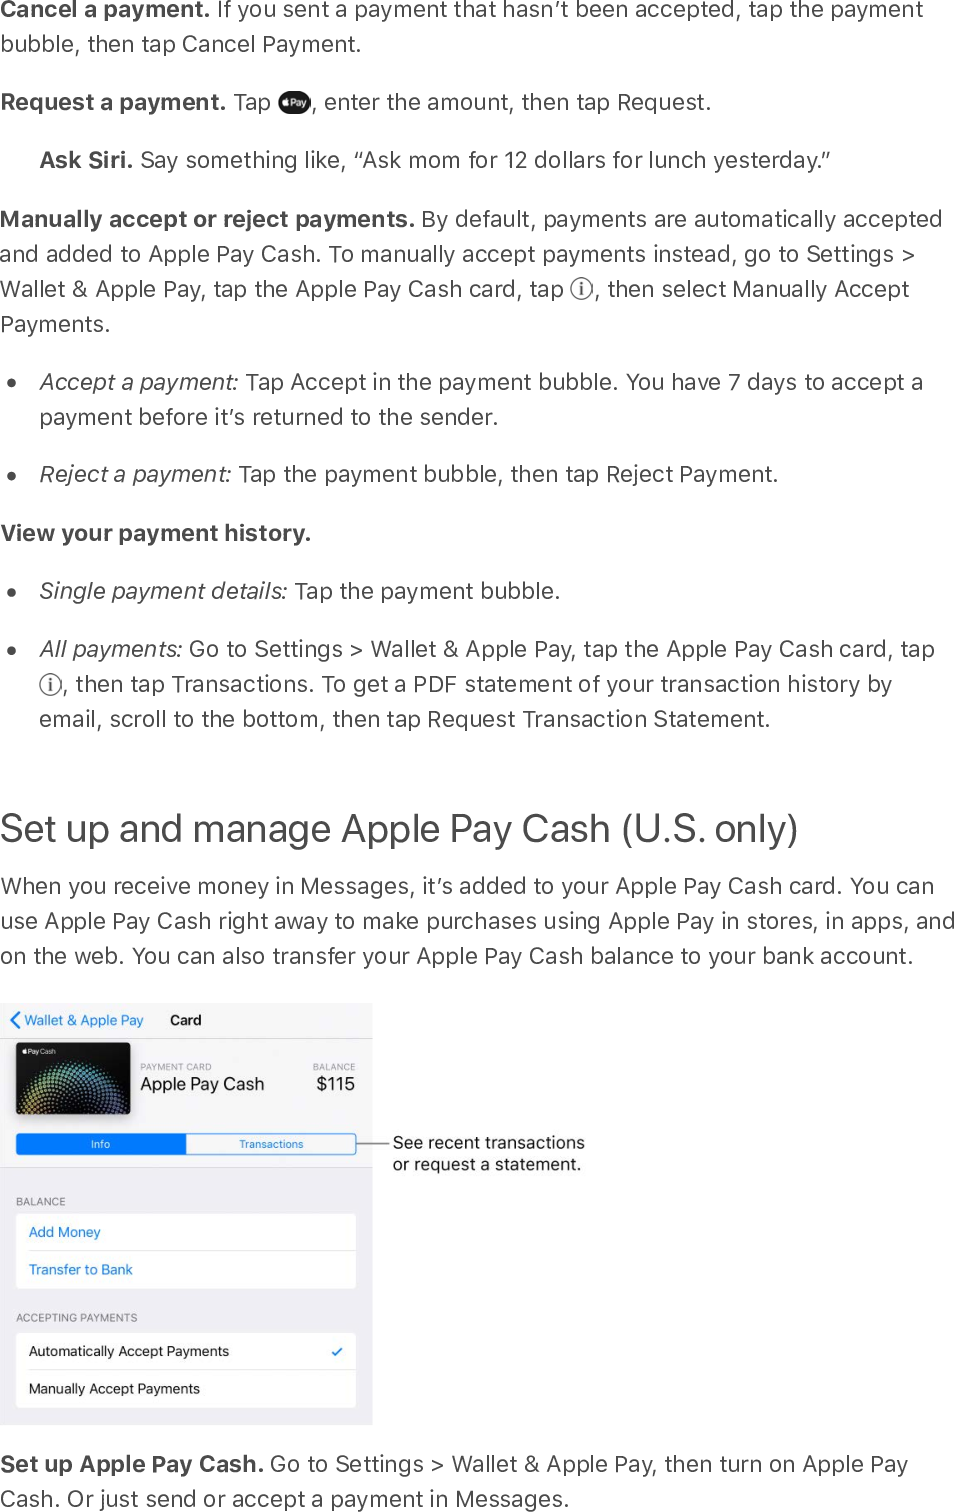 Cancel a payment. If you sent a payment that hasnʼt been accepted, tap the paymentbubble, then tap Cancel Payment.Request a payment. Tap  , enter the amount, then tap Request.Ask Siri. Say something like, “Ask mom for 12 dollars for lunch yesterday.”Manually accept or reject payments. By default, payments are automatically acceptedand added to Apple Pay Cash. To manually accept payments instead, go to Settings &gt;Wallet &amp; Apple Pay, tap the Apple Pay Cash card, tap  , then select Manually AcceptPayments.Accept a payment: Tap Accept in the payment bubble. You have 7 days to accept apayment before itʼs returned to the sender.Reject a payment: Tap the payment bubble, then tap Reject Payment.View your payment history.  Single payment details: Tap the payment bubble.All payments: Go to Settings &gt; Wallet &amp; Apple Pay, tap the Apple Pay Cash card, tap , then tap Transactions. To get a PDF statement of your transaction history byemail, scroll to the bottom, then tap Request Transaction Statement.Set up and manage Apple Pay Cash (U.S. only)When you receive money in Messages, itʼs added to your Apple Pay Cash card. You canuse Apple Pay Cash right away to make purchases using Apple Pay in stores, in apps, andon the web. You can also transfer your Apple Pay Cash balance to your bank account.Set up Apple Pay Cash. Go to Settings &gt; Wallet &amp; Apple Pay, then turn on Apple PayCash. Or just send or accept a payment in Messages.